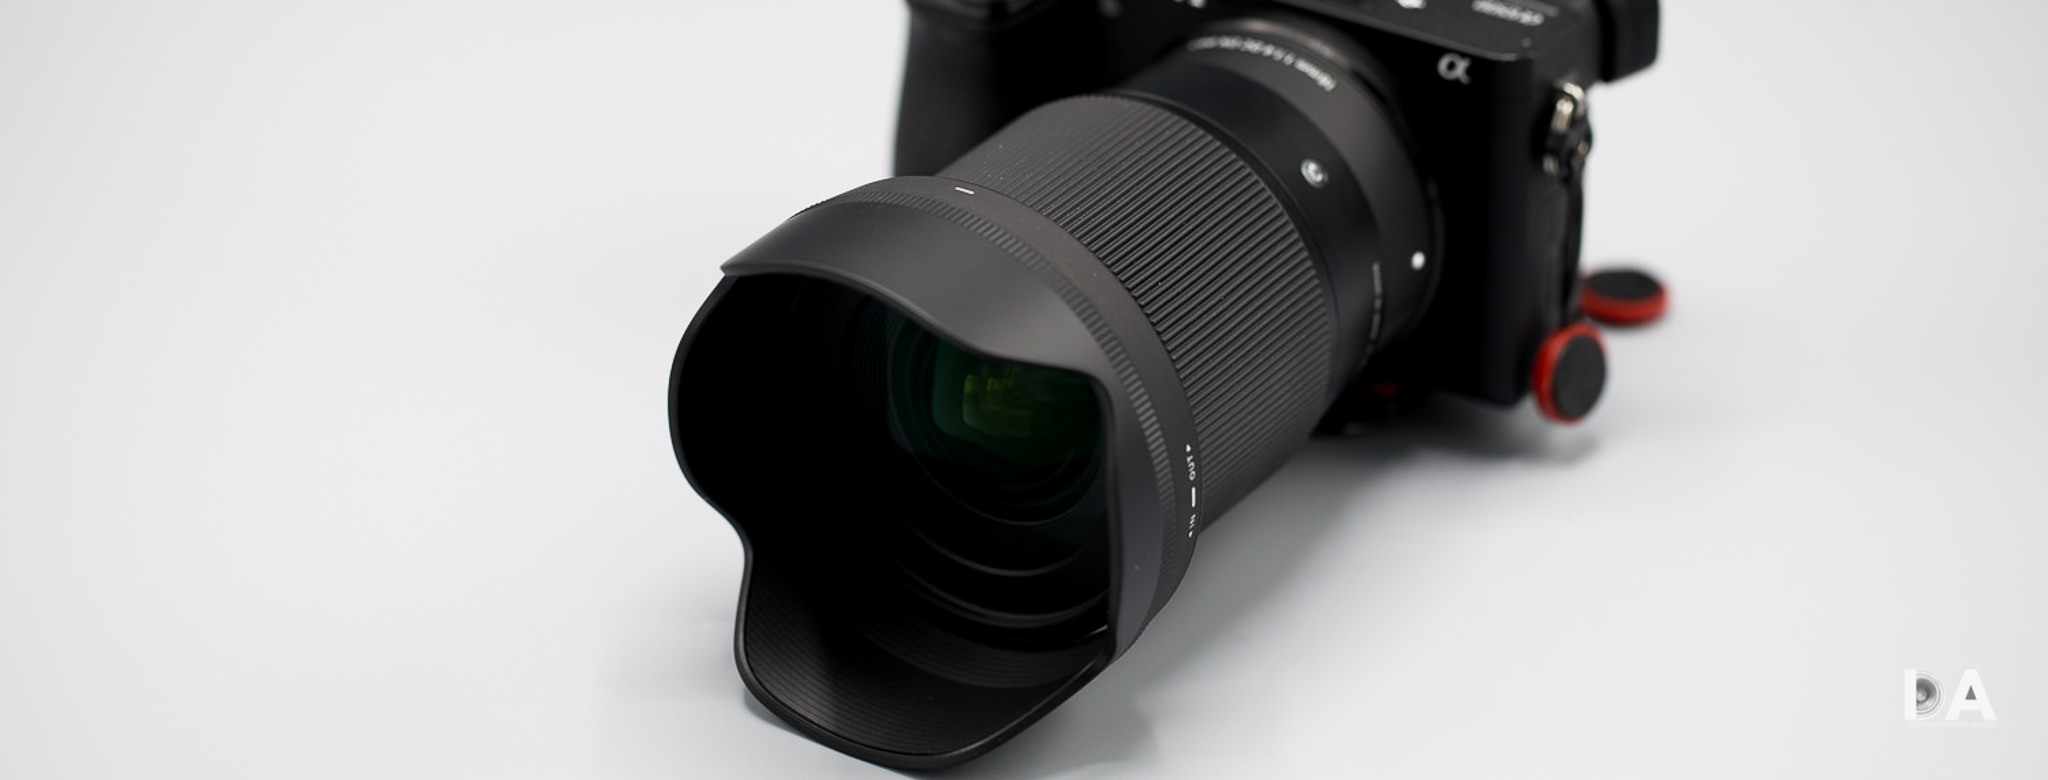 Sigma 16mm f/1.4 DC DN Contemporary Review - DustinAbbott.net